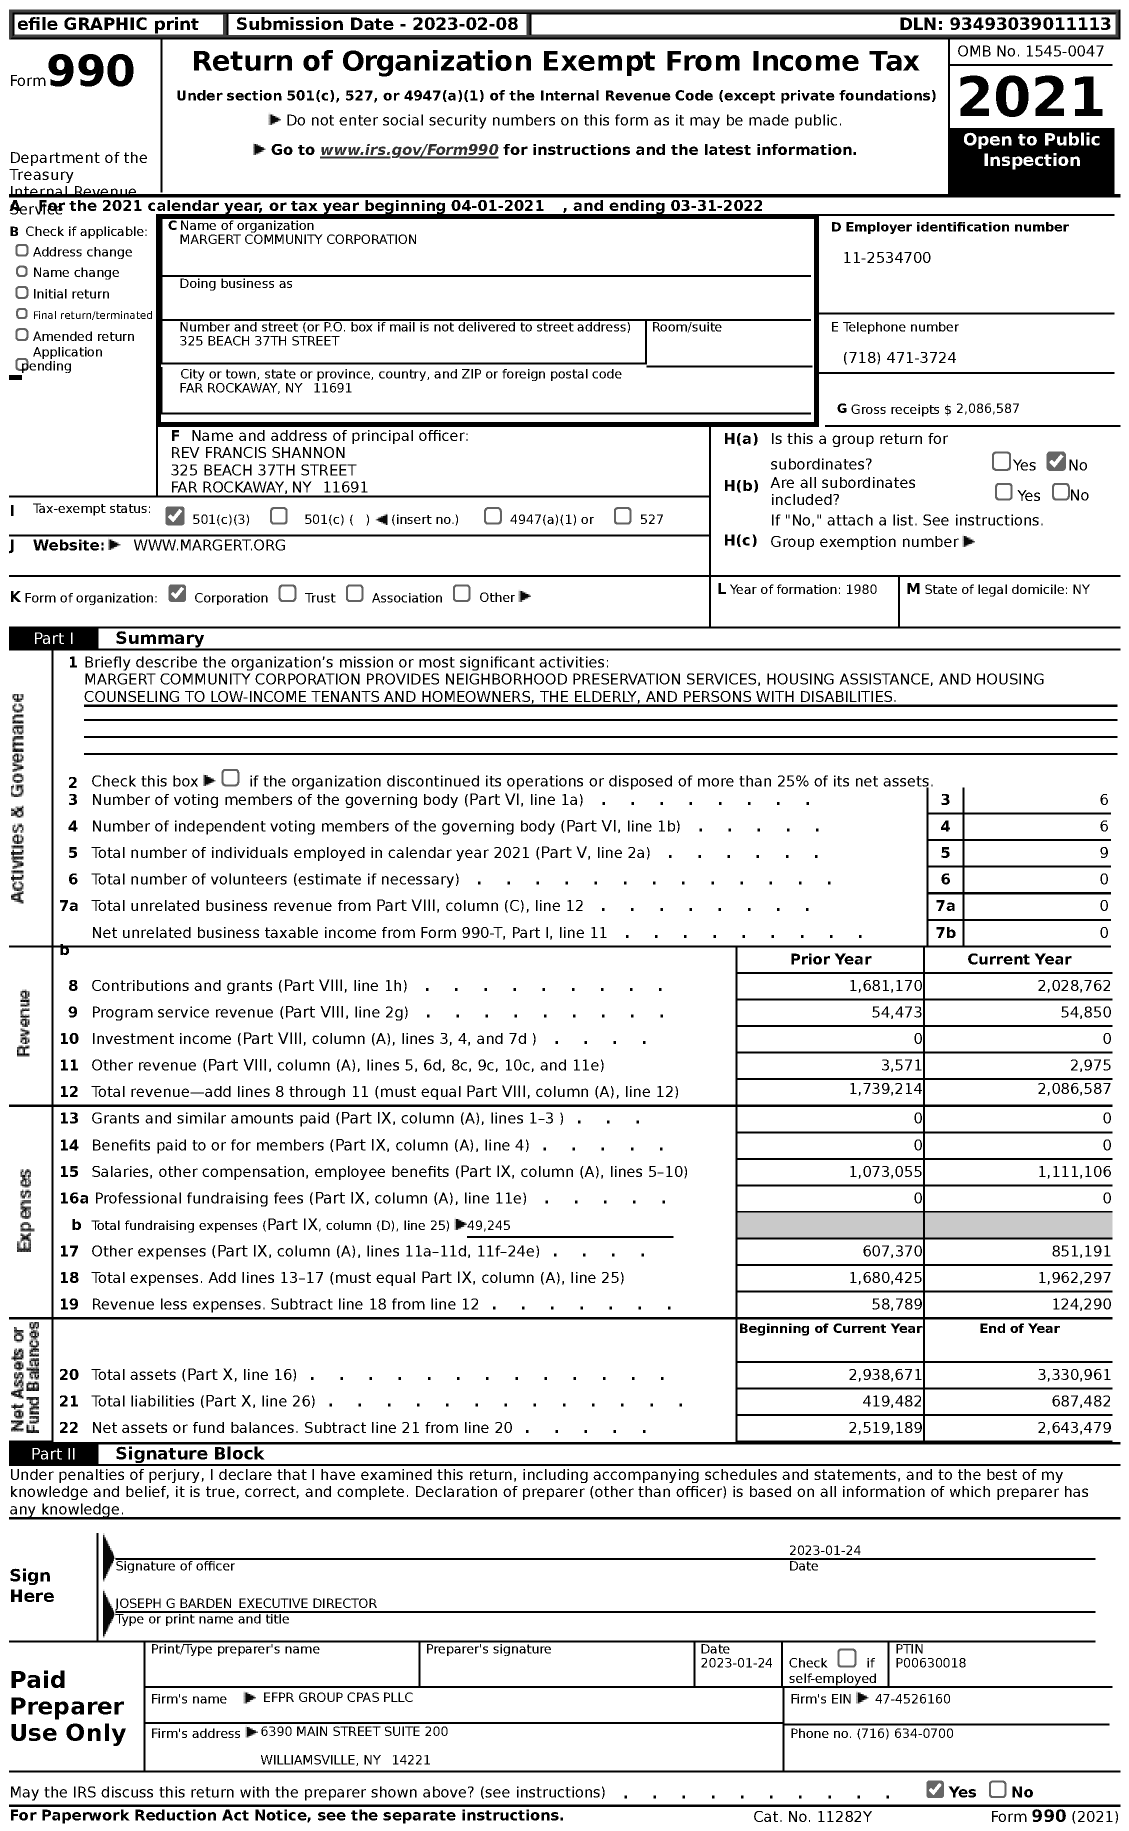 Image of first page of 2021 Form 990 for Margert Community Corporation